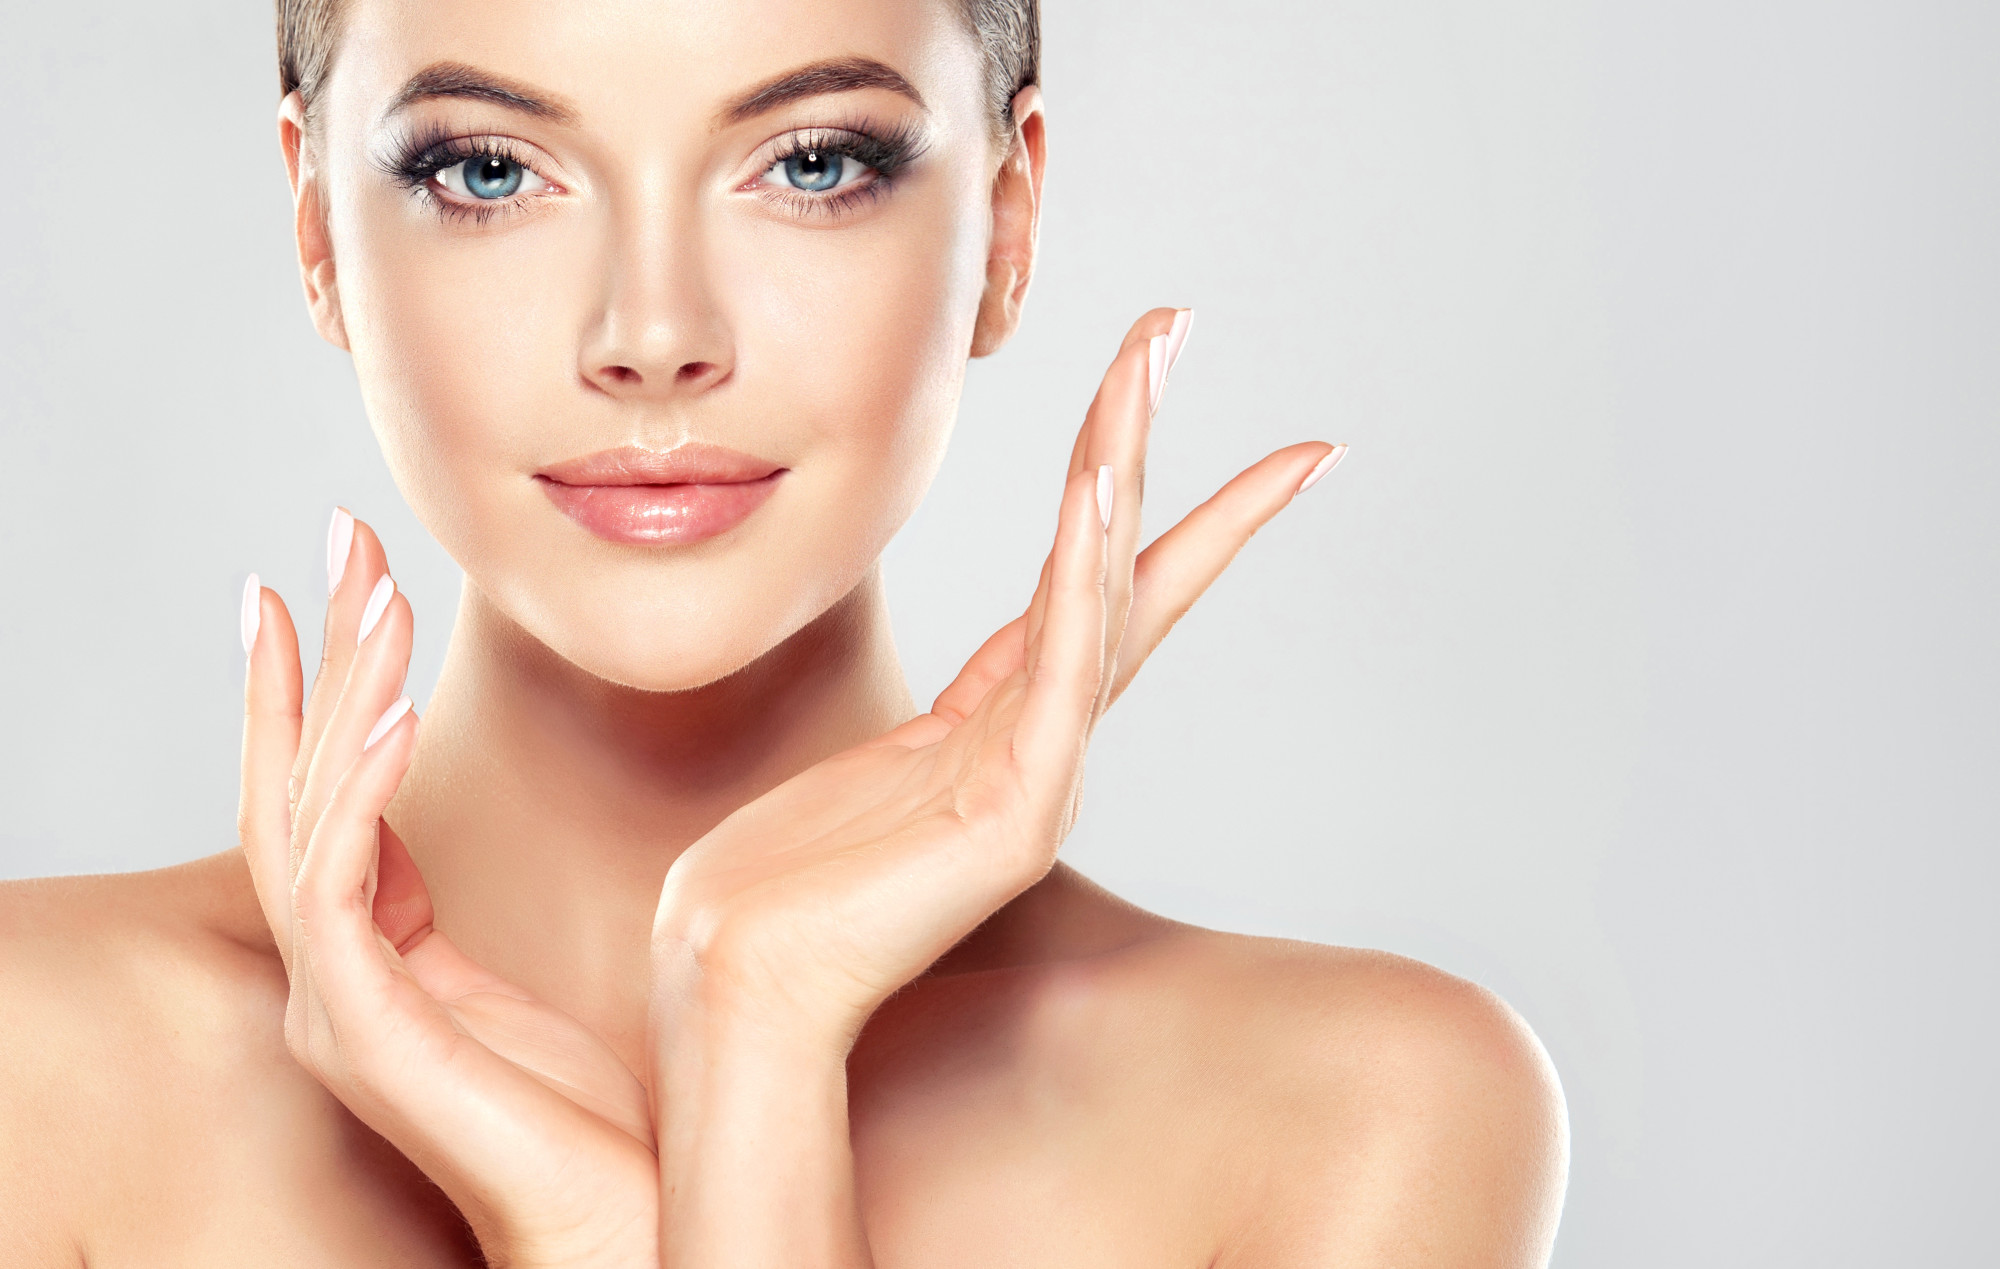 What Are the Different Types of Cosmetic Treatments That Exist Today?